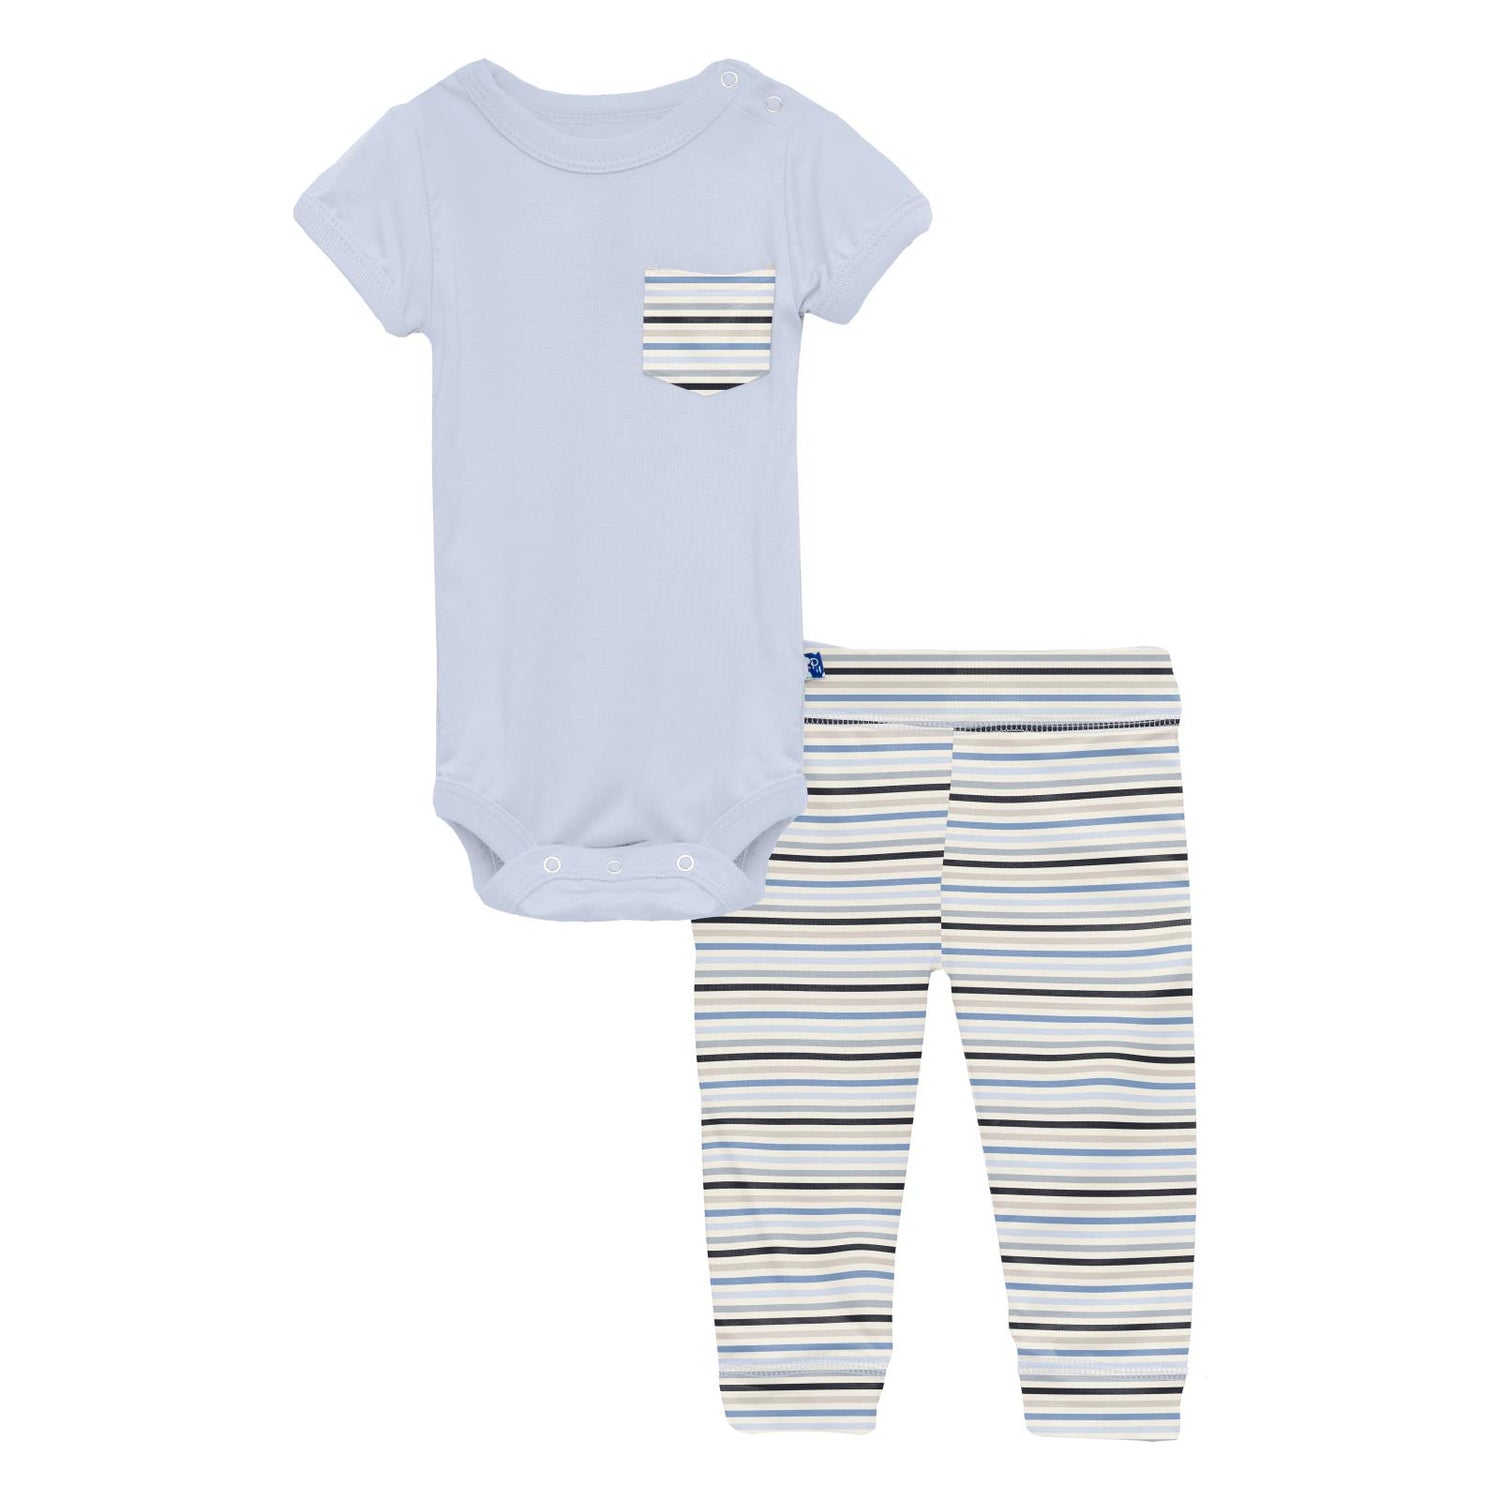 Print Short Sleeve Pocket One Piece & Pants Outfit Set in Rhyme Stripe